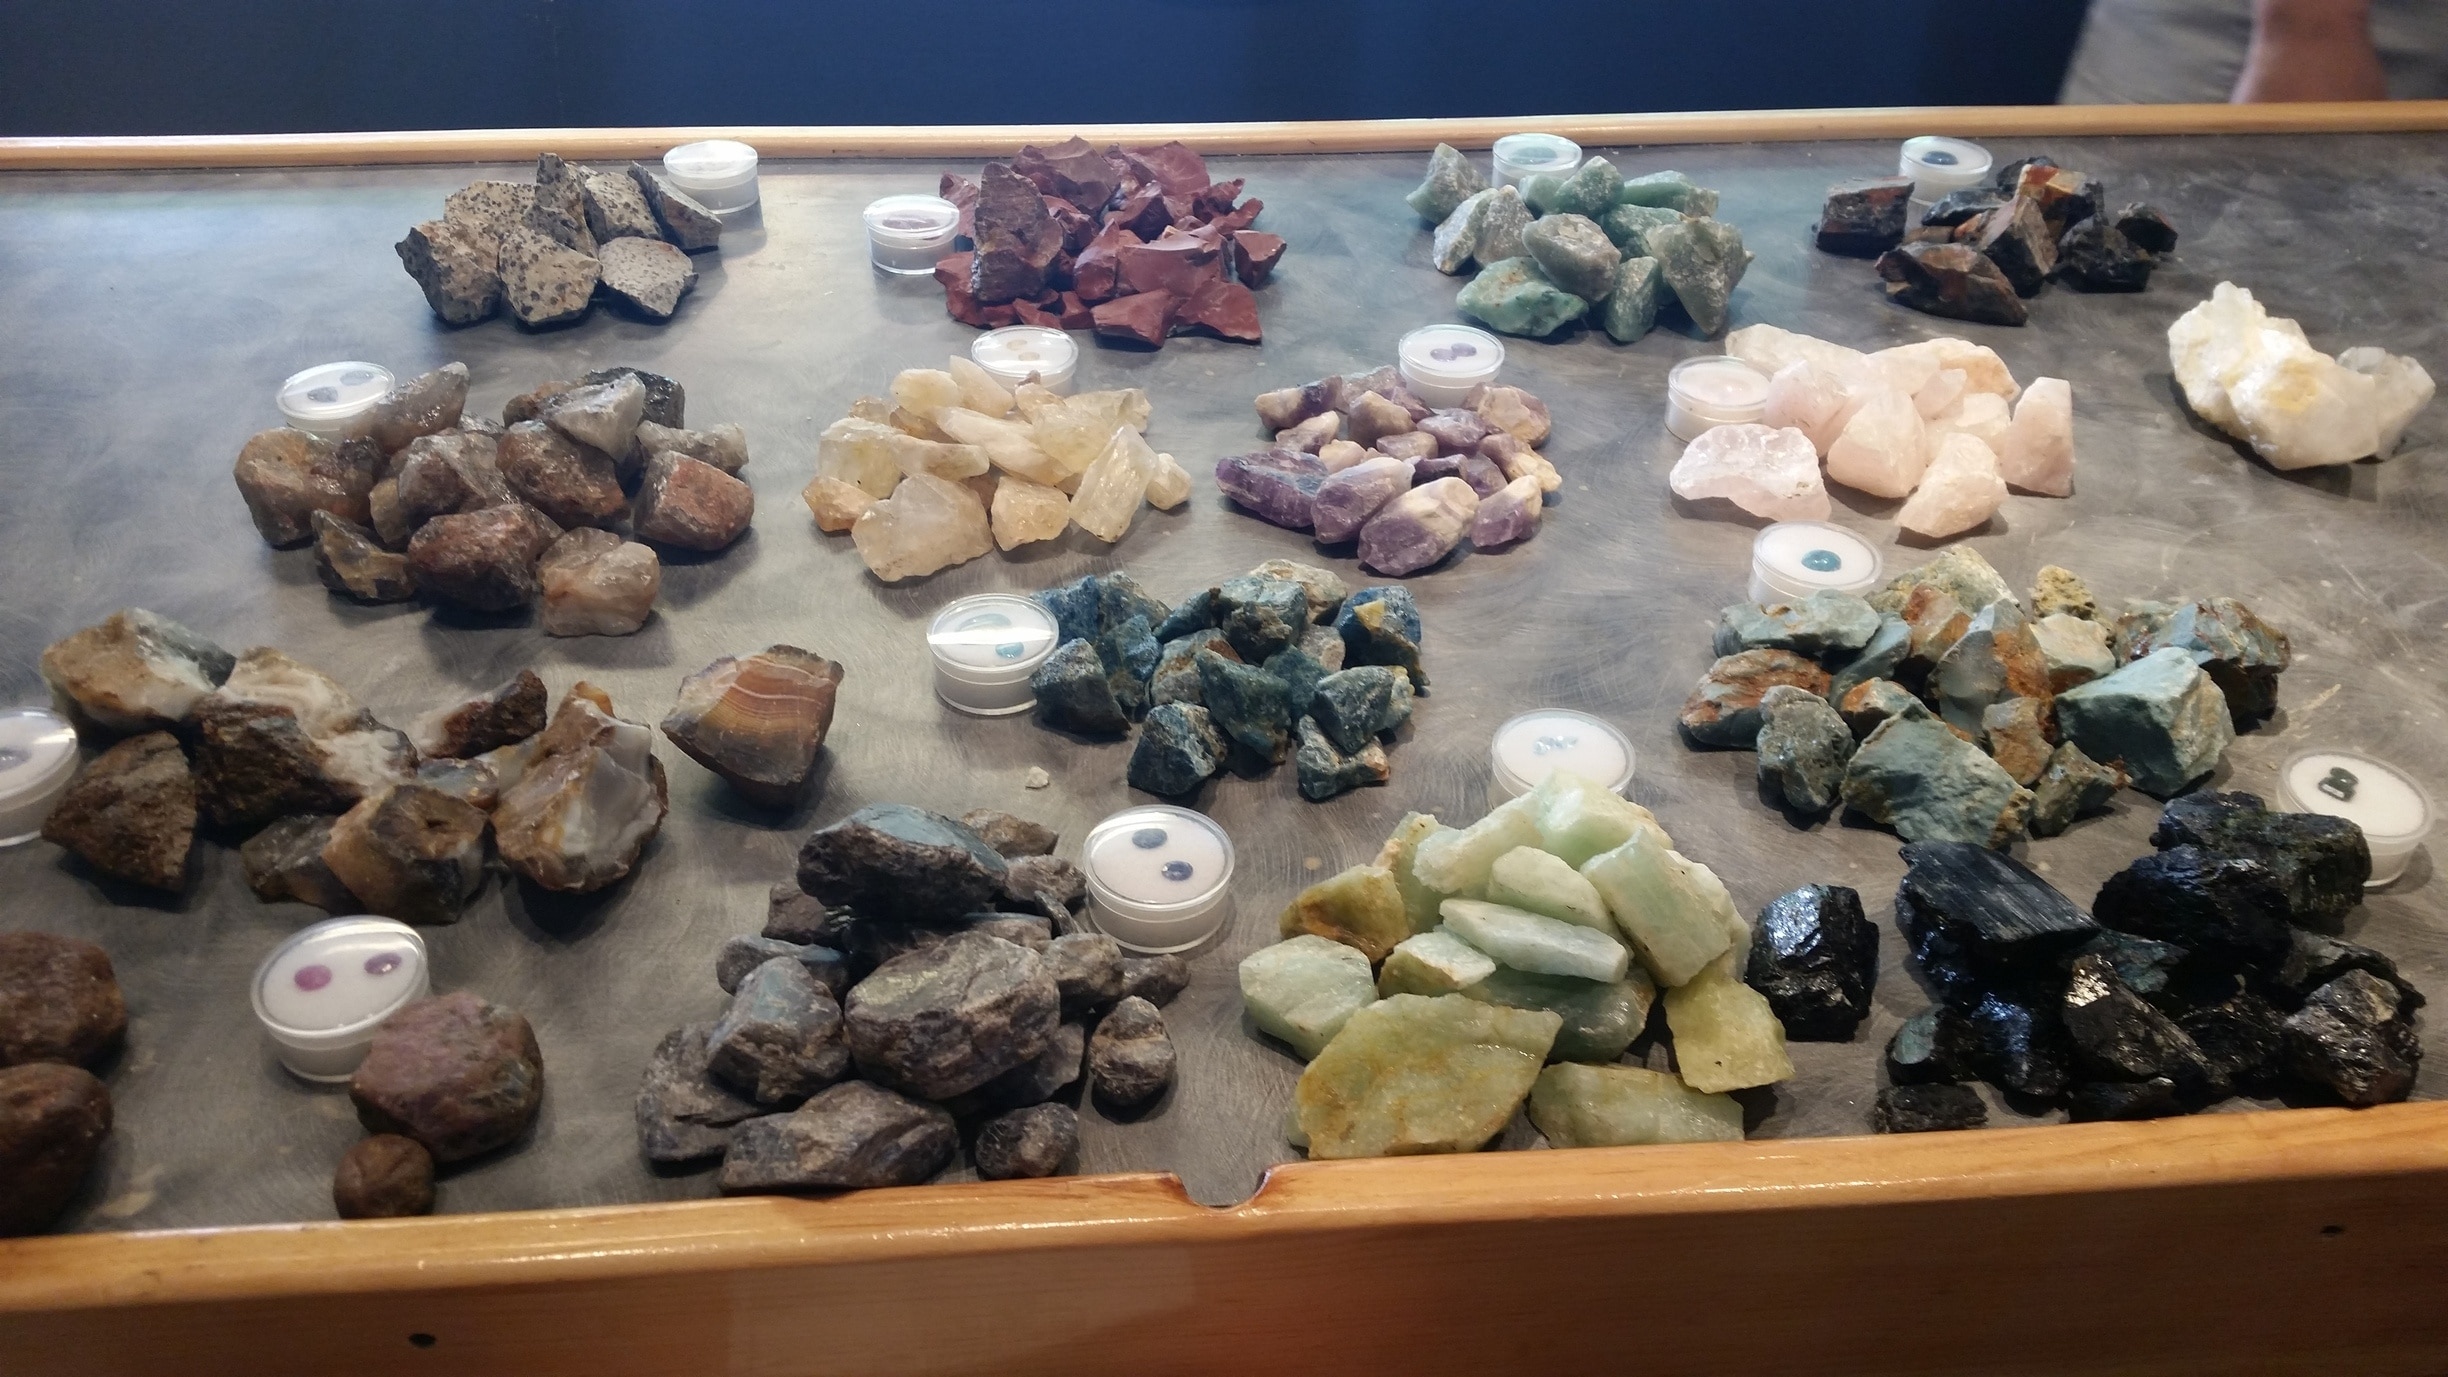 After you've found all the awesome gems in your bucket o' rocks they sort them out and tell you what you've found. We got all these from the mother load bucket. They'll cut and set them in jewelry for you as well